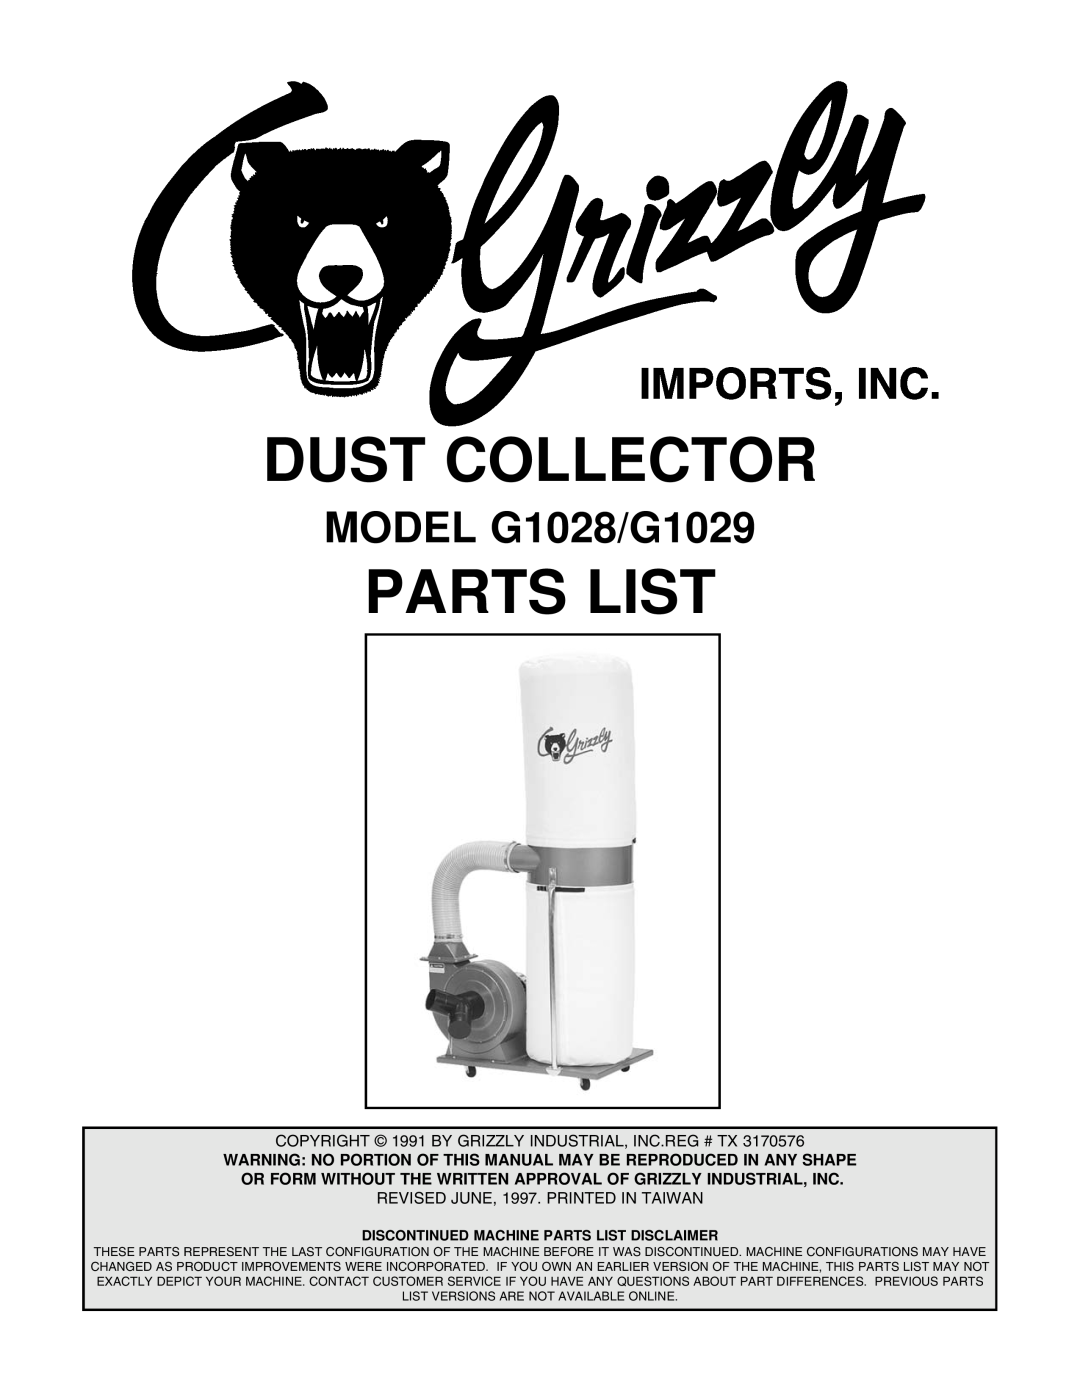 Grizzly manual Dust Collector, Parts List, MODEL G1028/G1029, COPYRIGHT 1991 BY GRIZZLY INDUSTRIAL, INC.REG # TX 